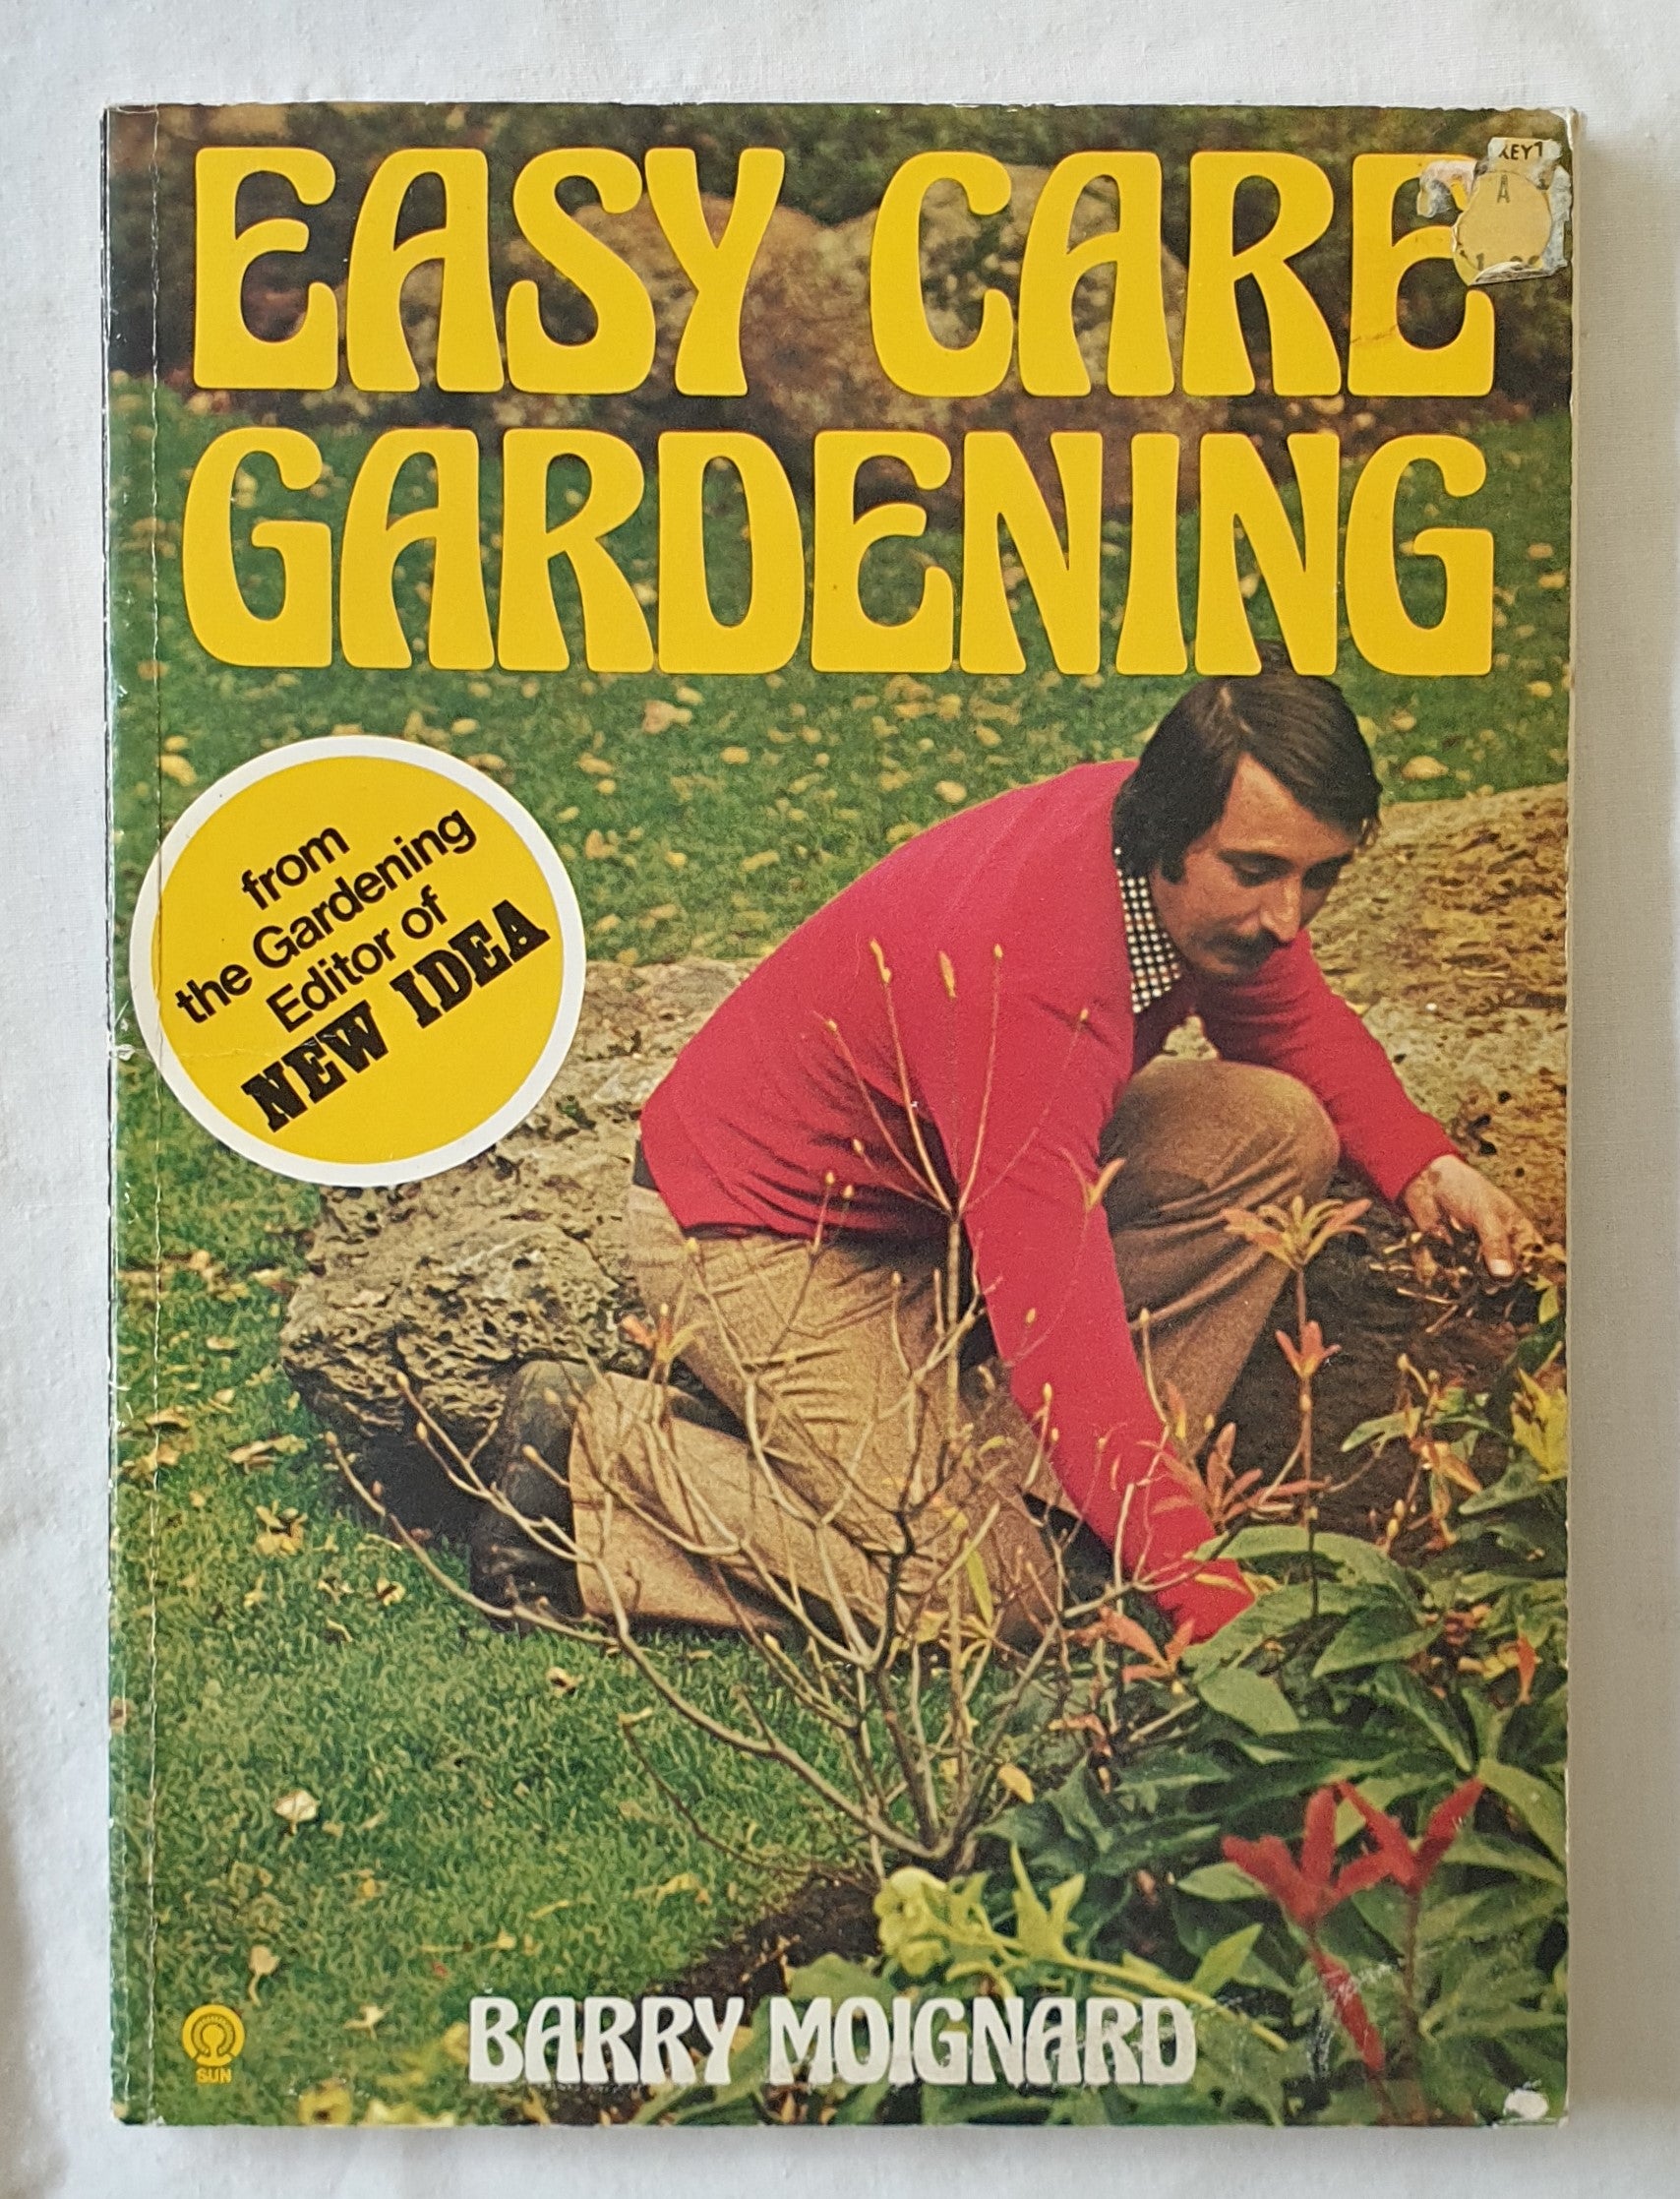 Easy Care Gardening by Barry Moignard